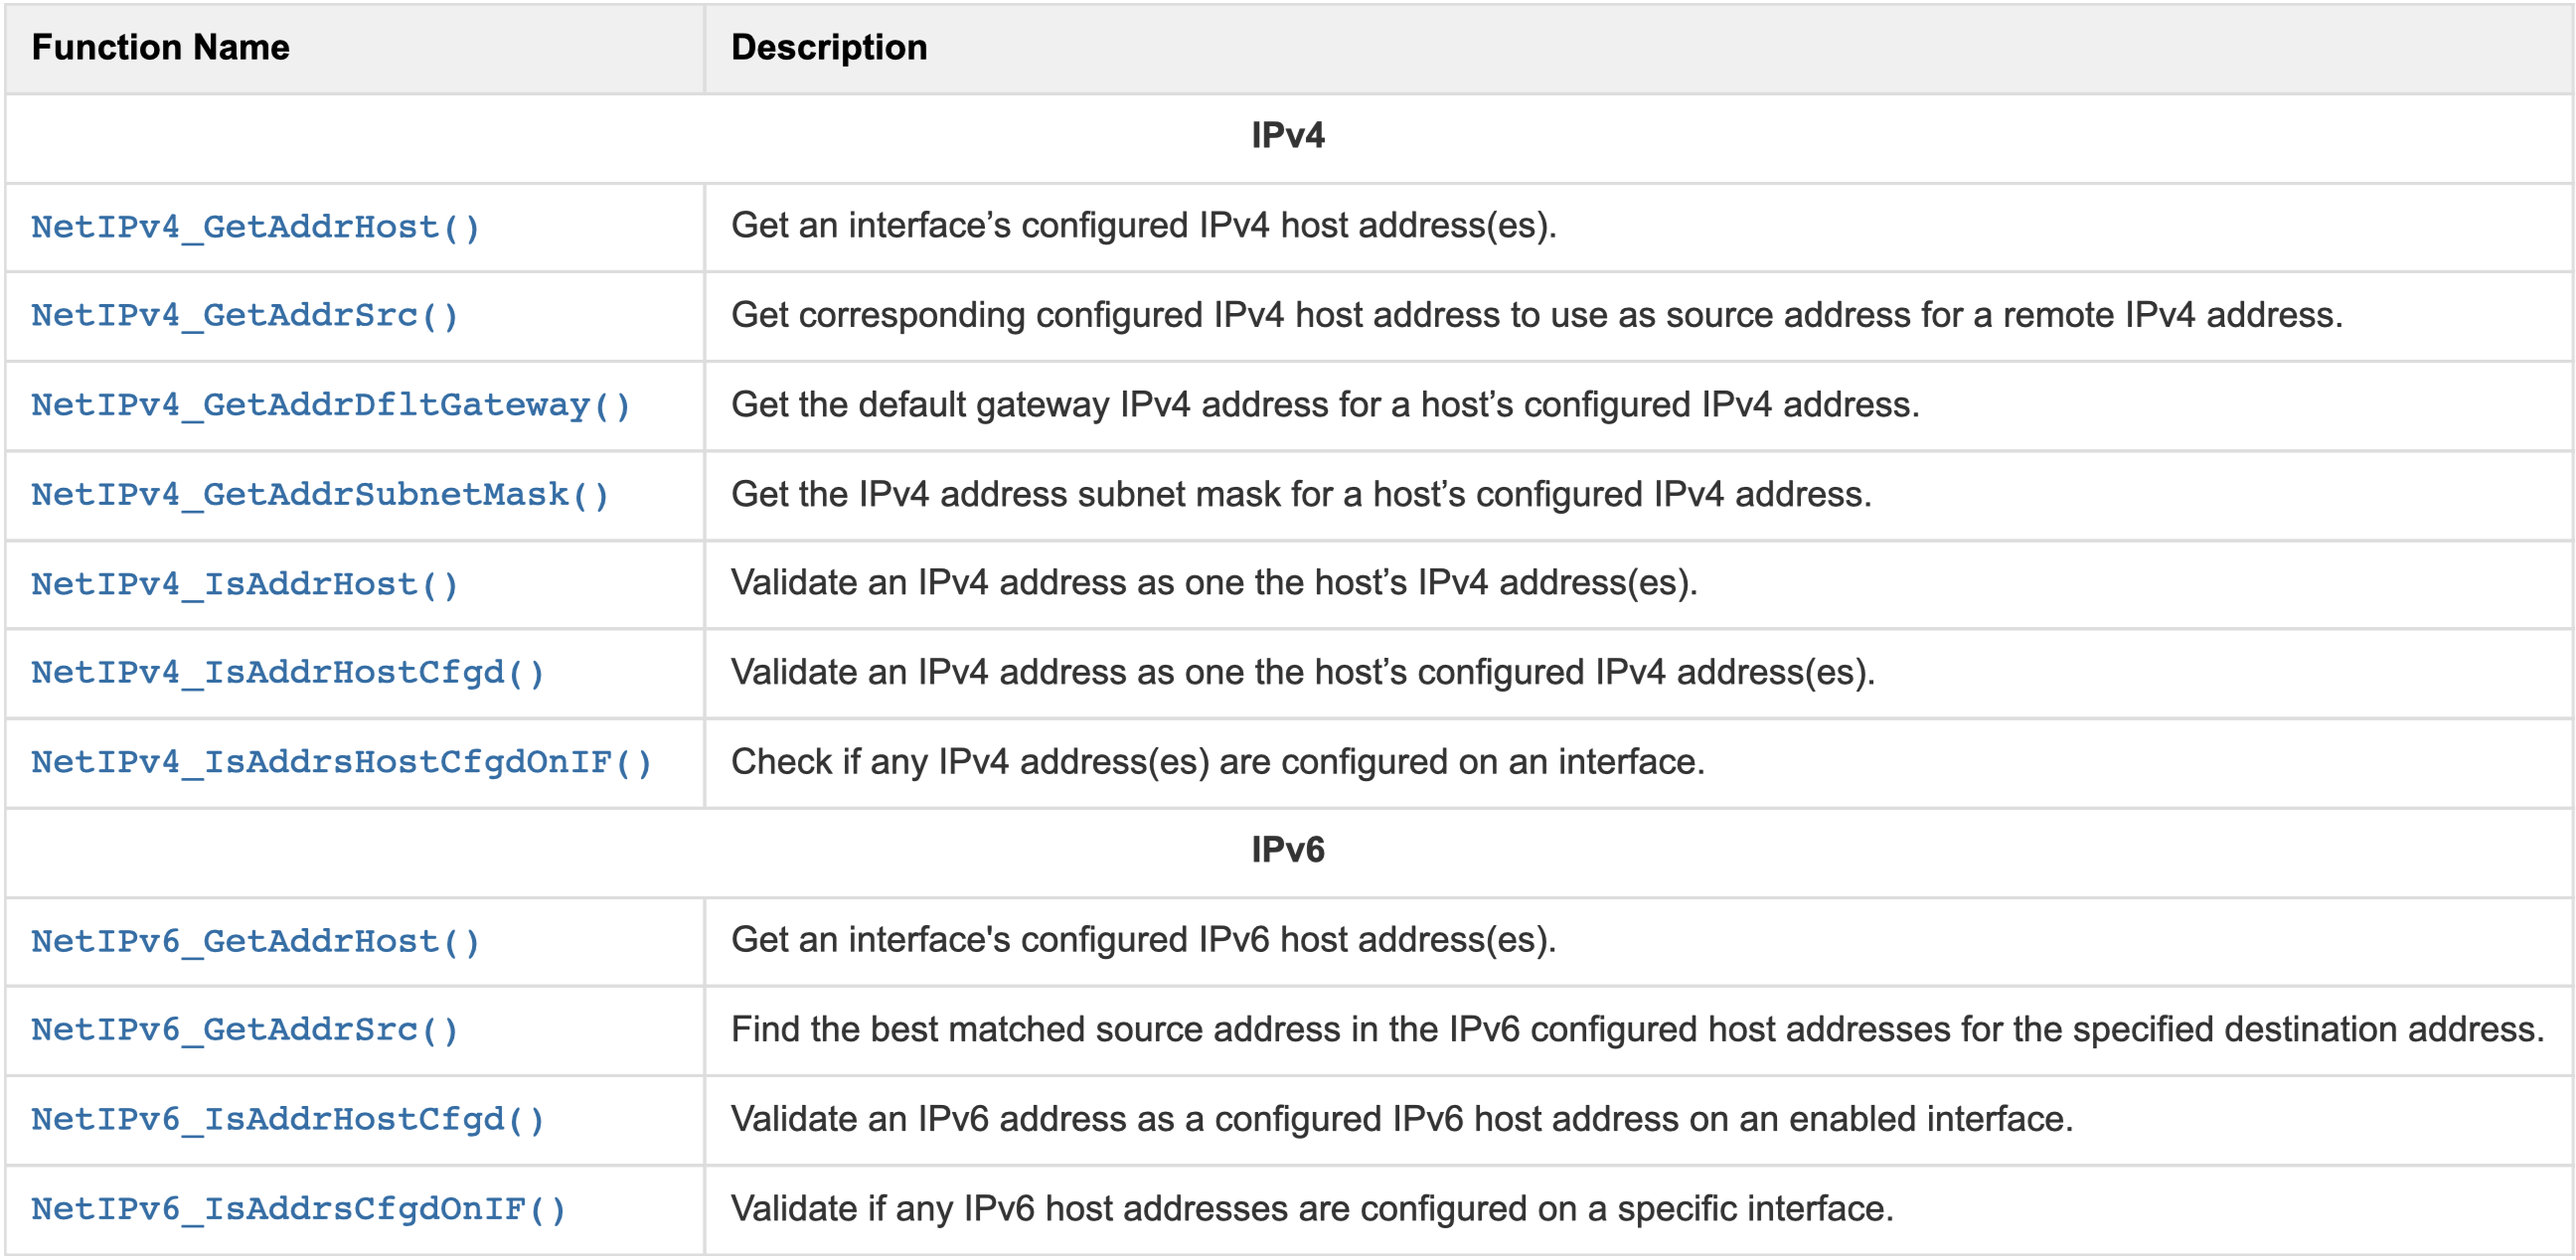 Interface Configured IP Address Functions